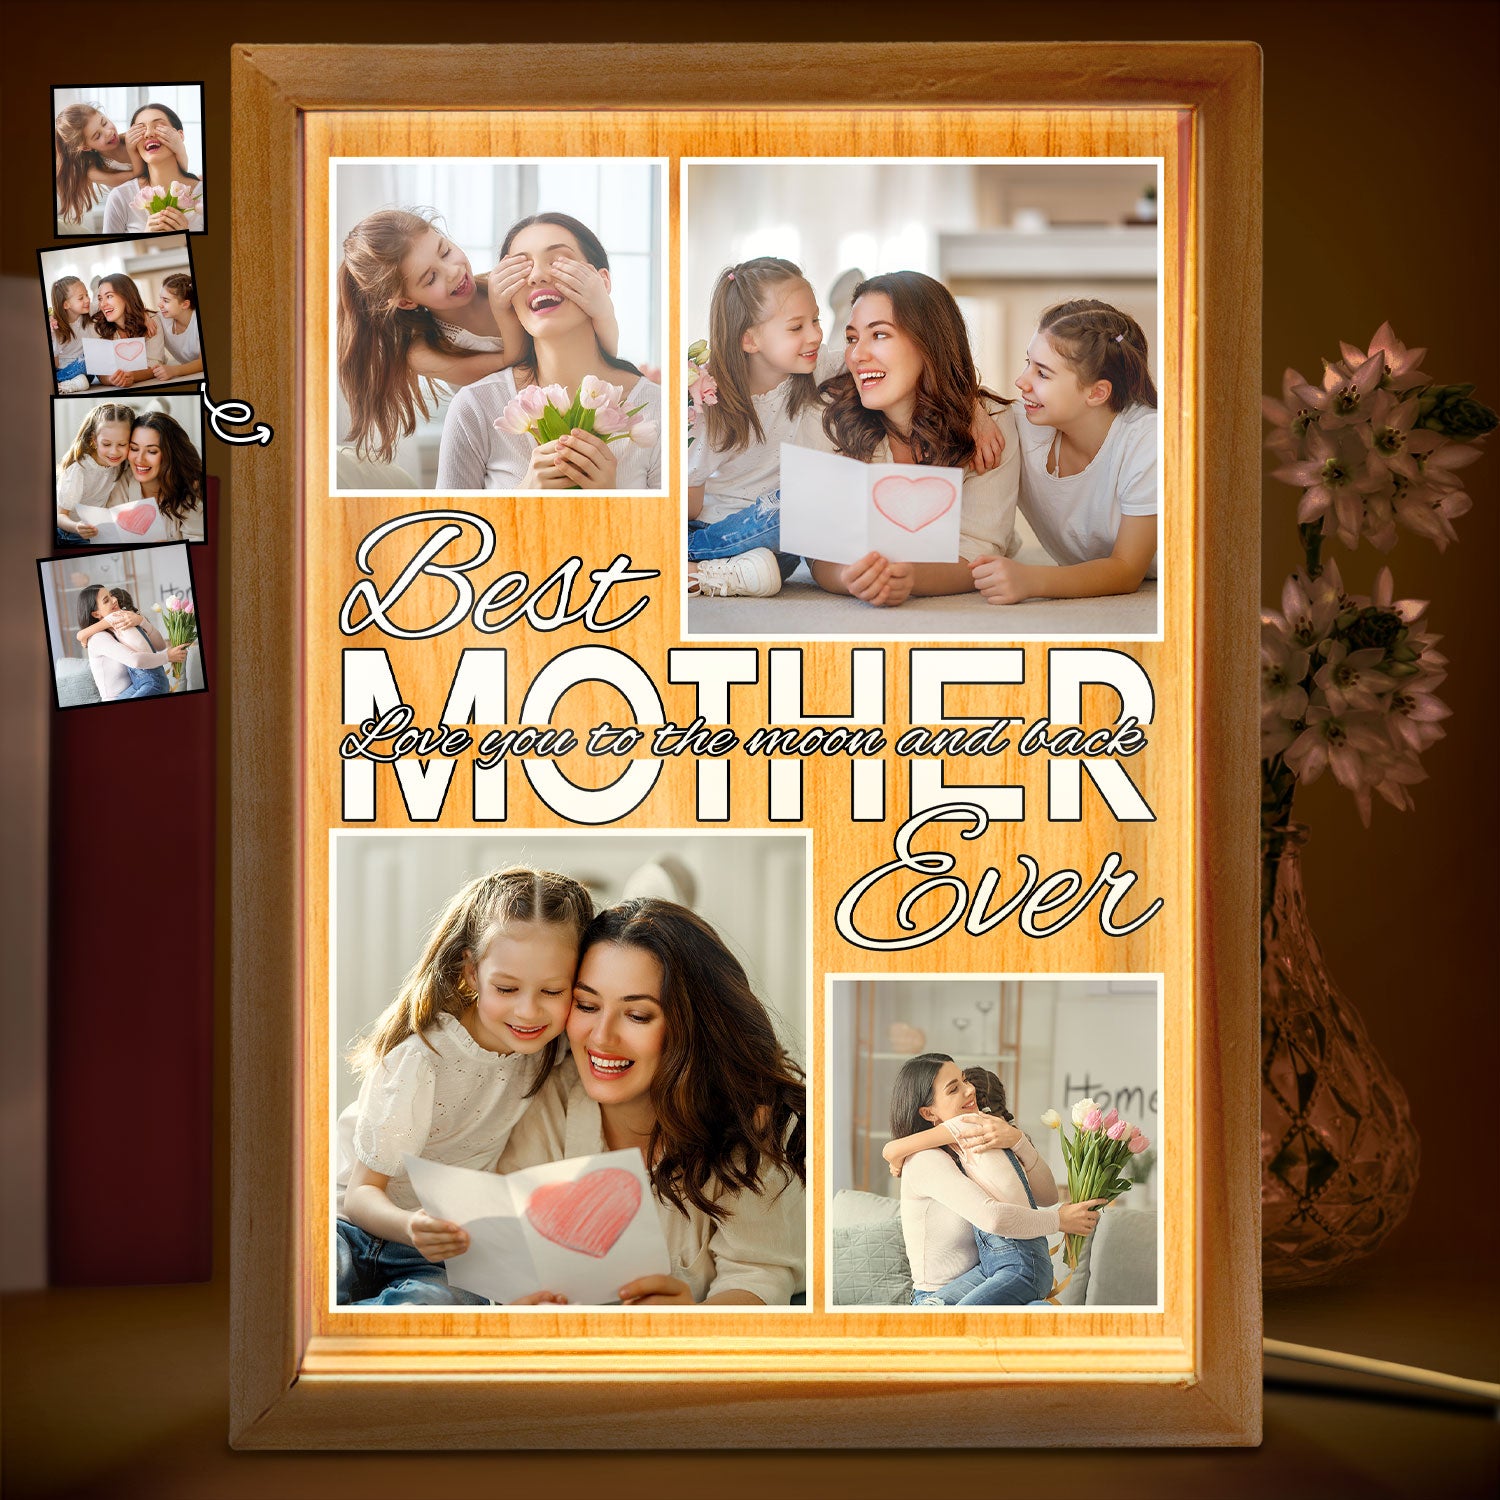 Custom Photo Your Loved Ones - Loving Gift For Mom, Mother, Dad, Father, Family, Couples, Friends - Personalized Picture Frame Light Box